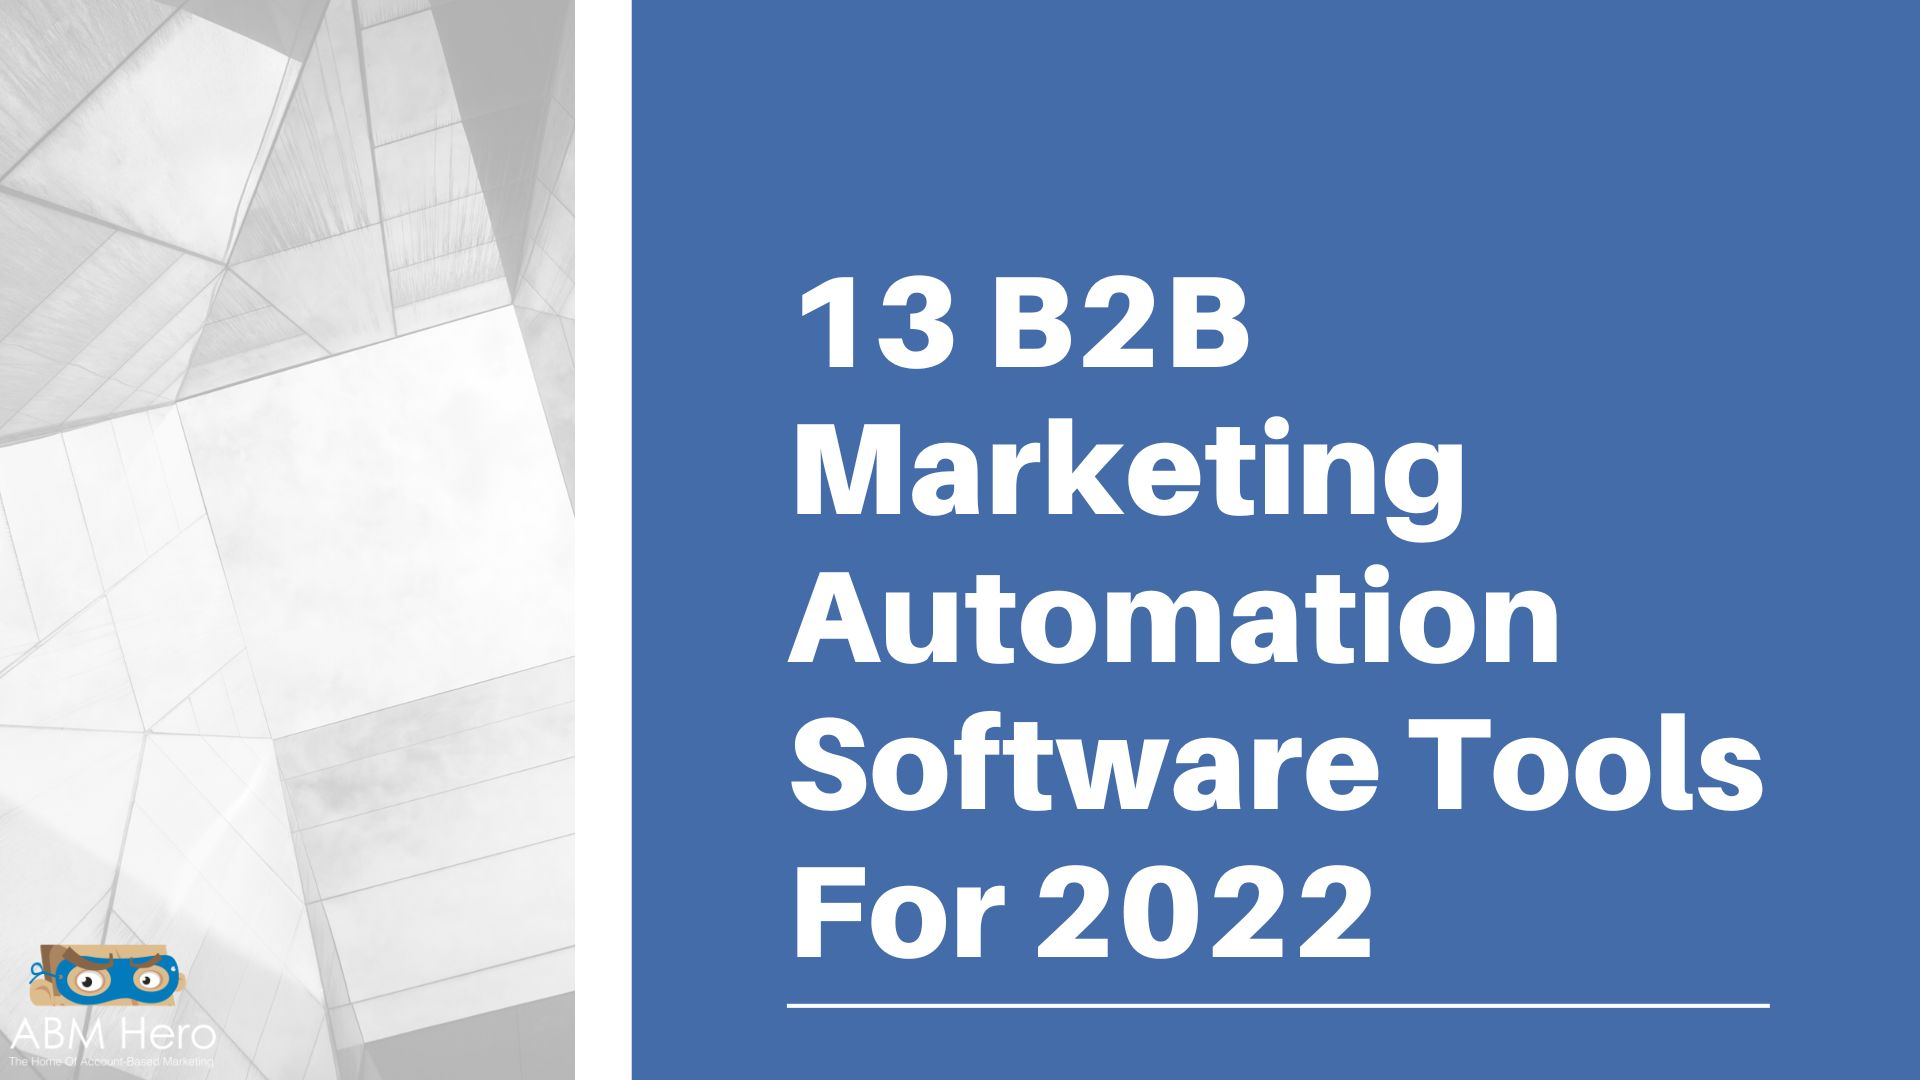 You are currently viewing 13 B2B Marketing Automation Software Tools For 2022